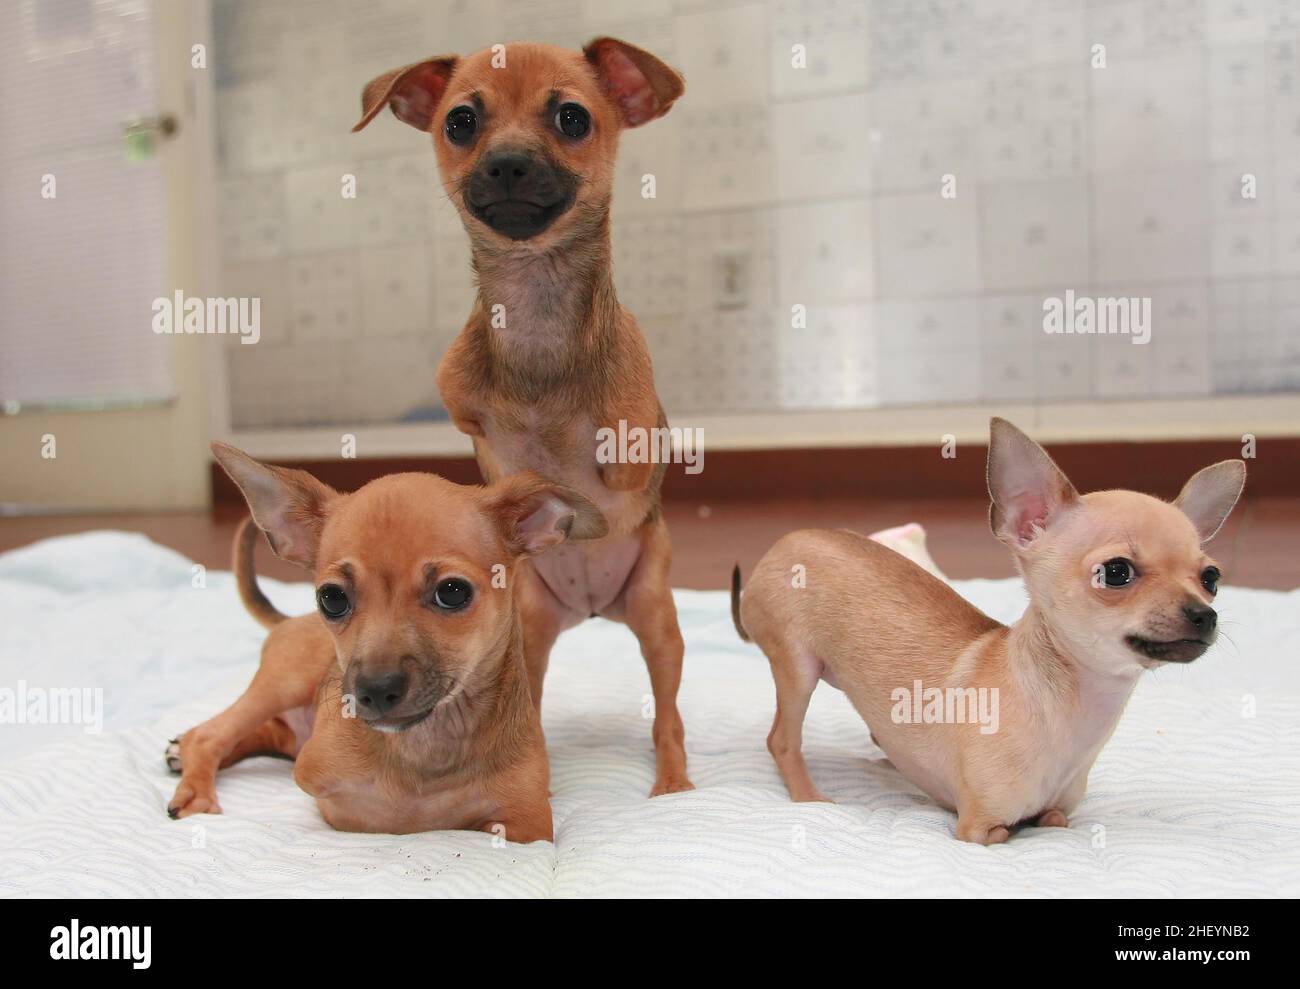 THREE OF THE WORLDS FIRST FOUR CHIHUAHUA PUPS WHO WERE BORN WITHOUT FRONT LEGS  .  THE WORLD'S FIRST FOUR CHIHUAHUA DOGS BORN WITHOUT FRONT LEGS HAVE LEARNT TO USE THEIR SPECIALLY ADAPTED WHEELS TO GET AROUND. NEW YORK, USA.  PICTURE: GARY ROBERTS Stock Photo